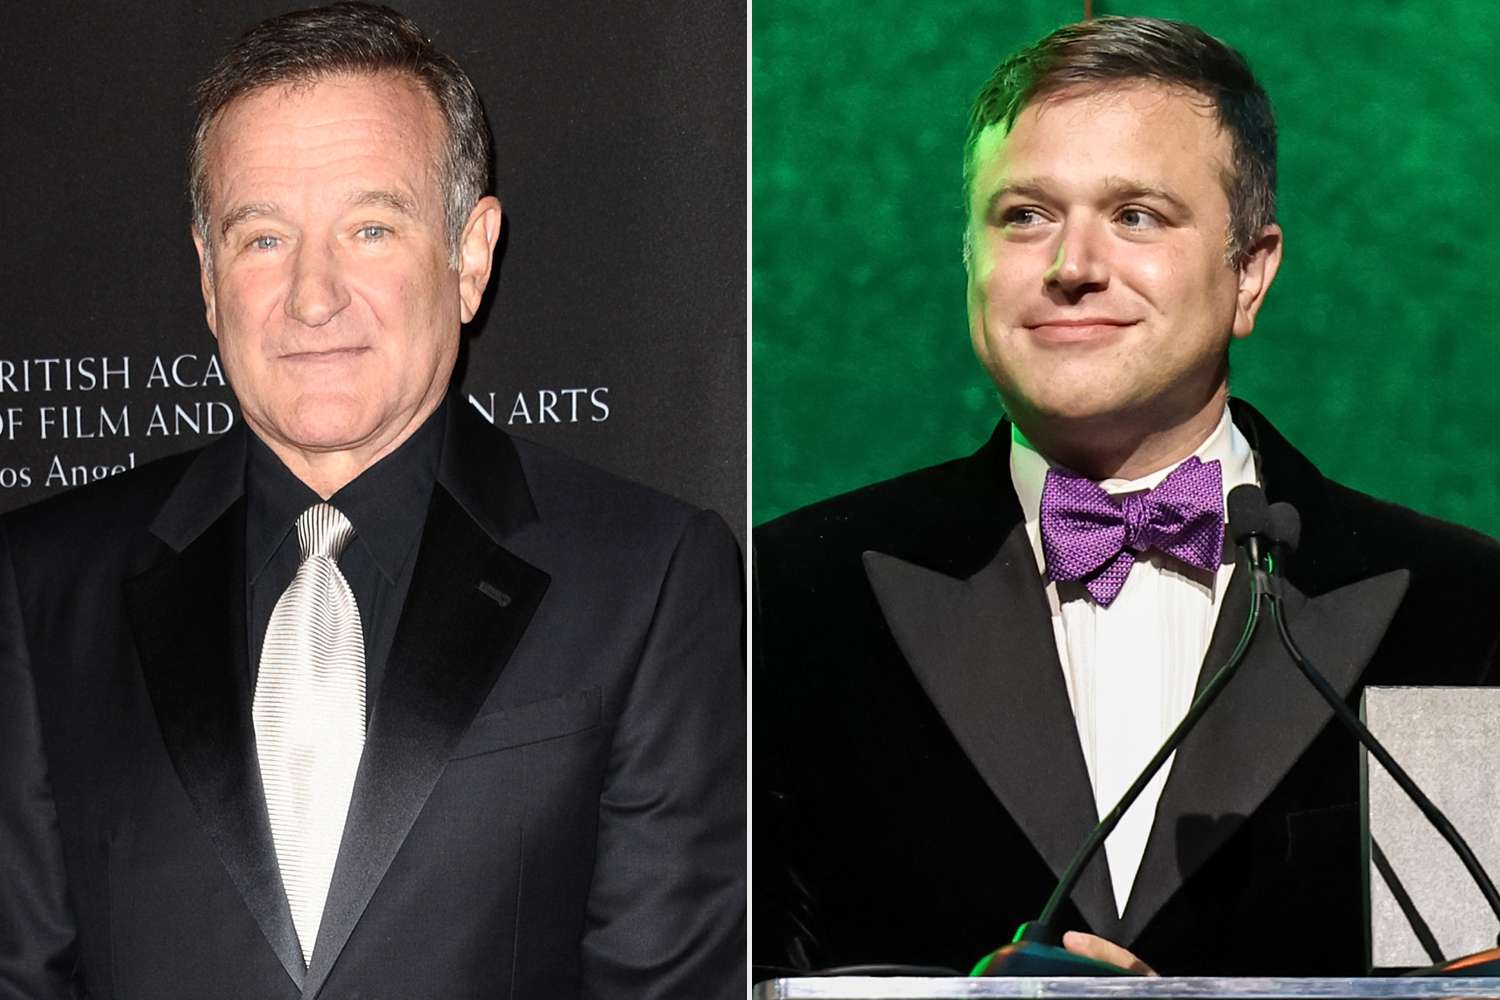 Robin Williams’ son posts sweet tribute to dad on the comedian’s 73rd birthday